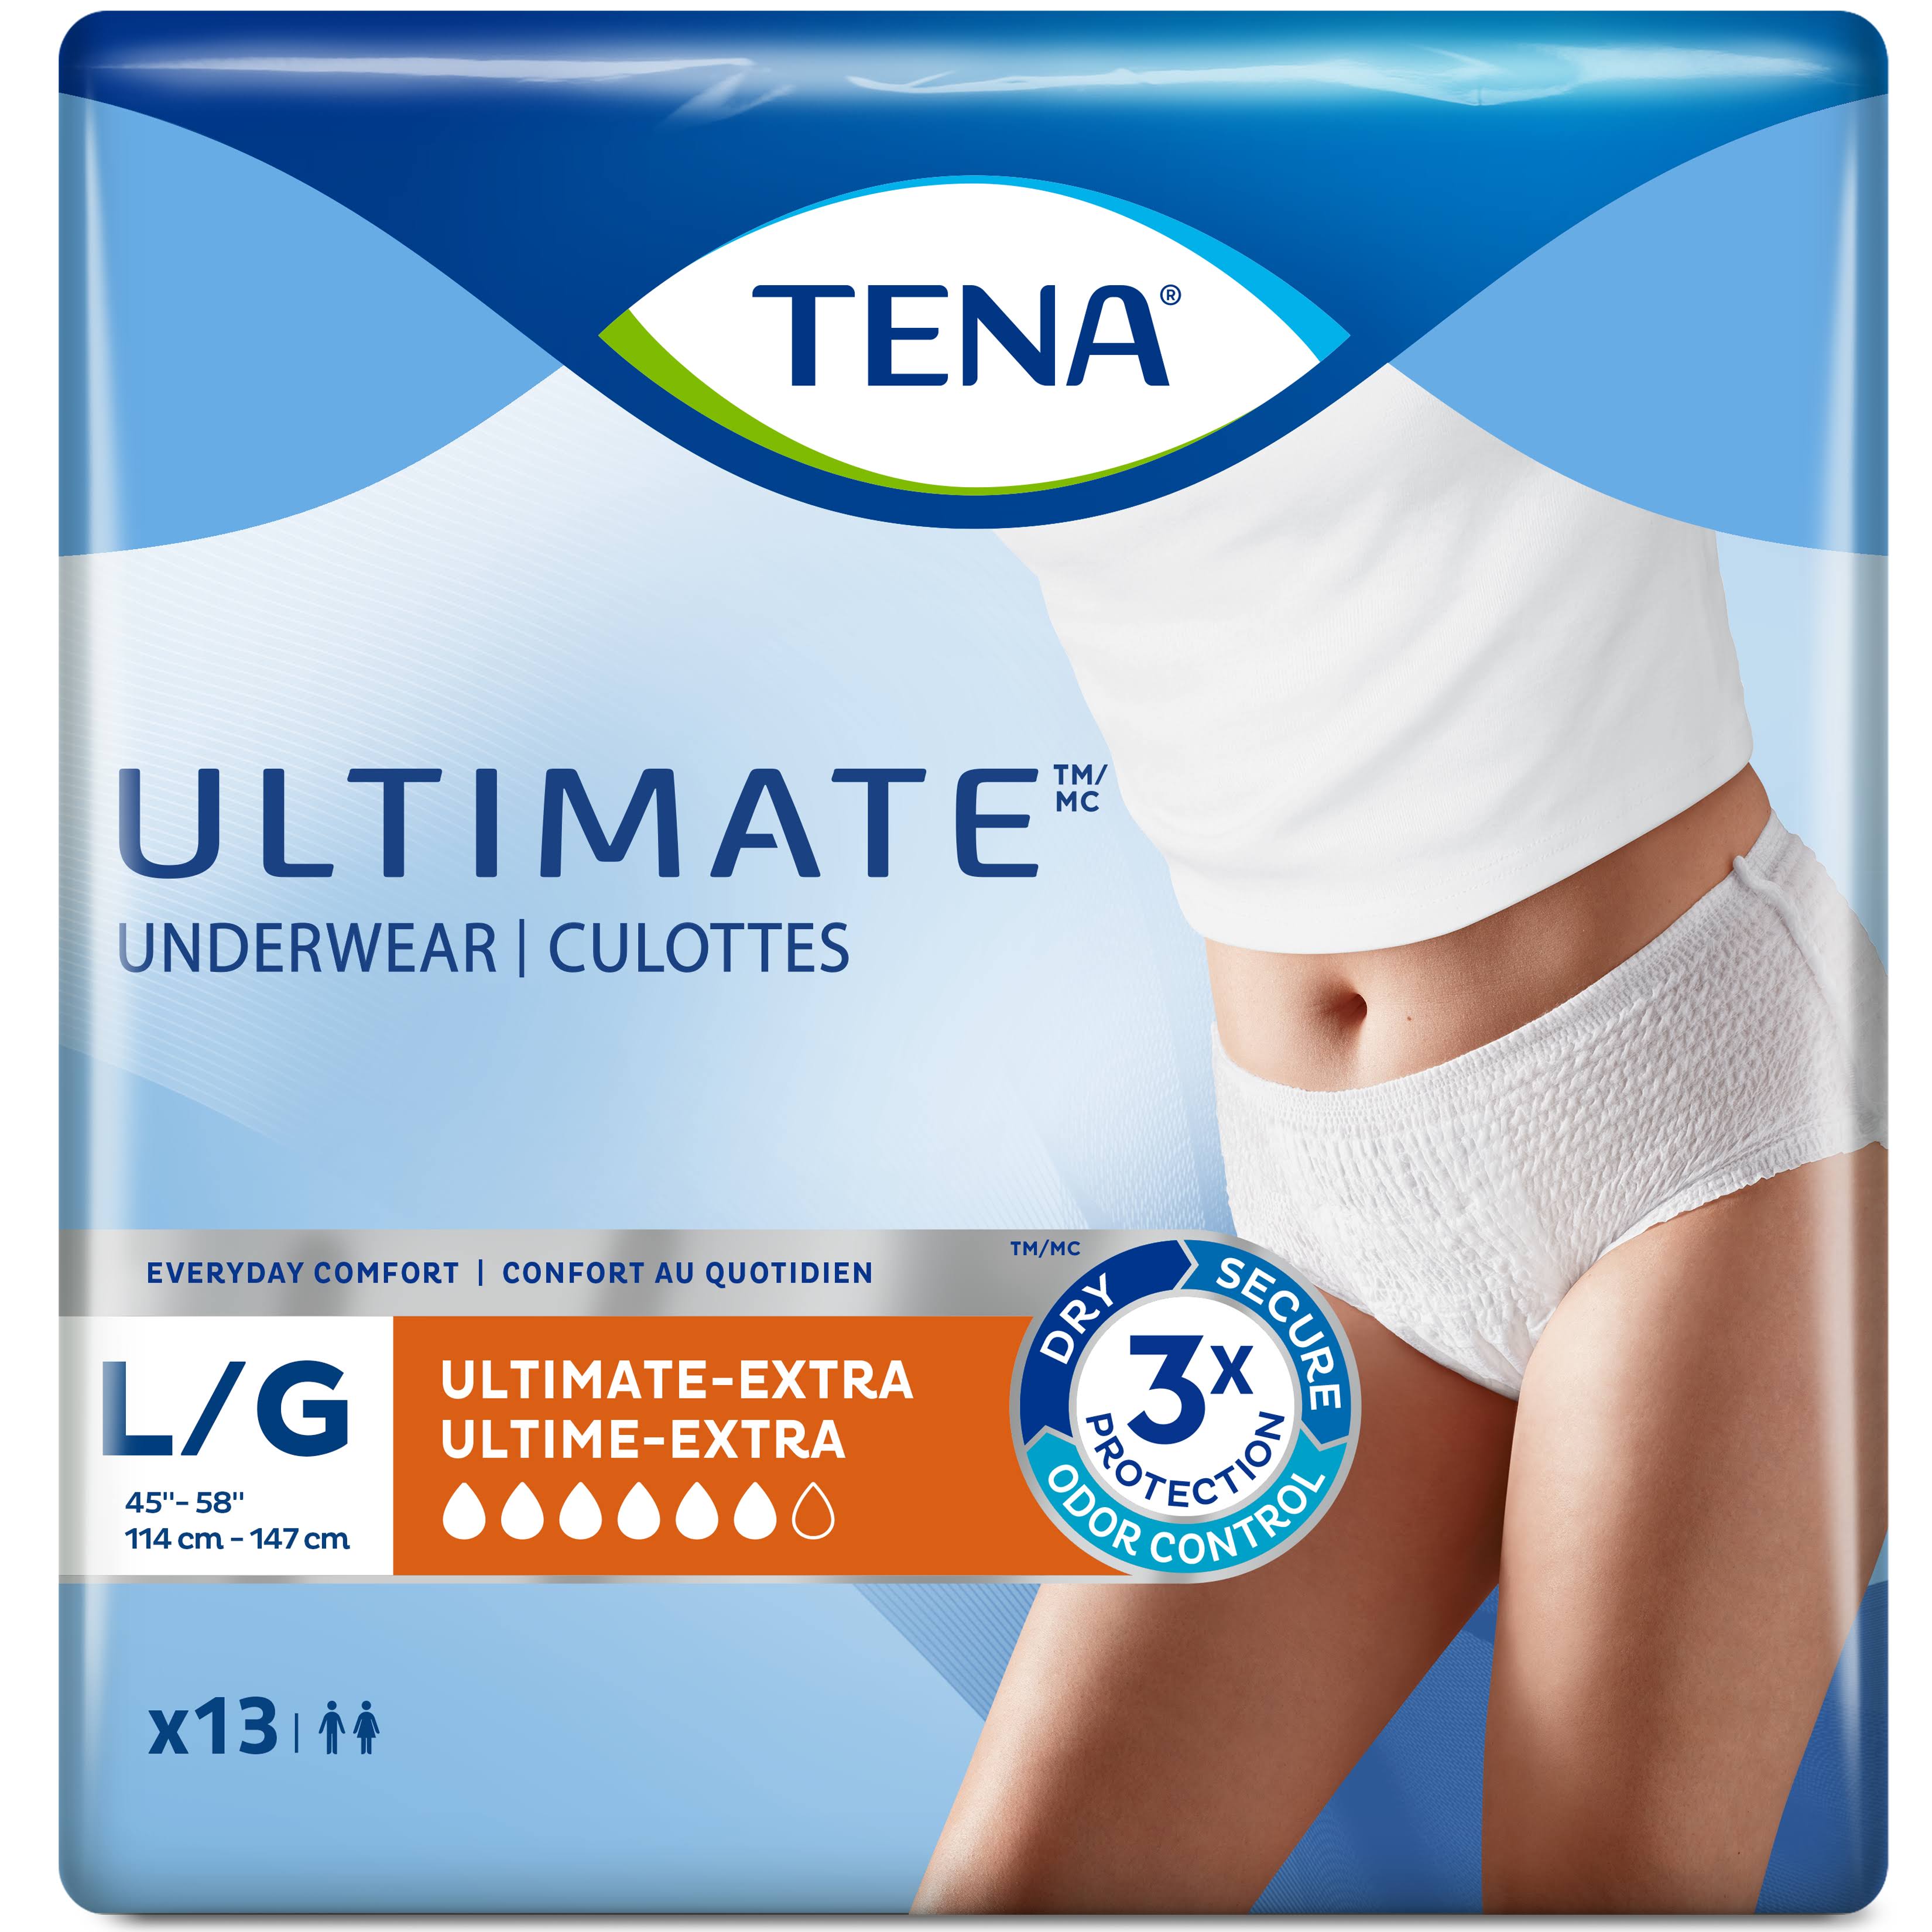 Tena Unisex Incontinence Underwear, Ultimate Absorbency, Large 13.0 Count